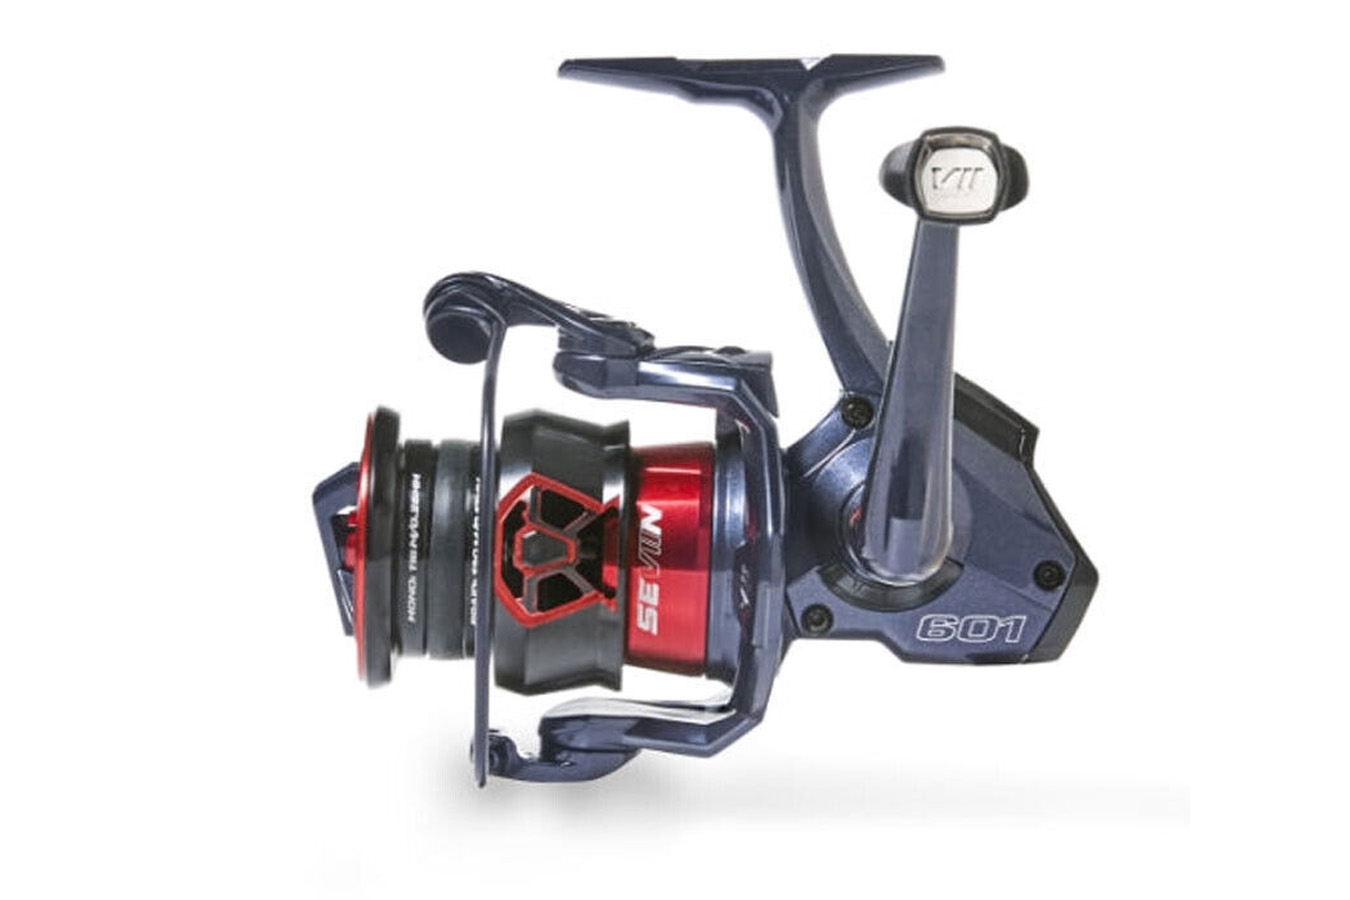 Discount St Croix Seviin 2500 GS Series 6.0:1 Spinning Reel for